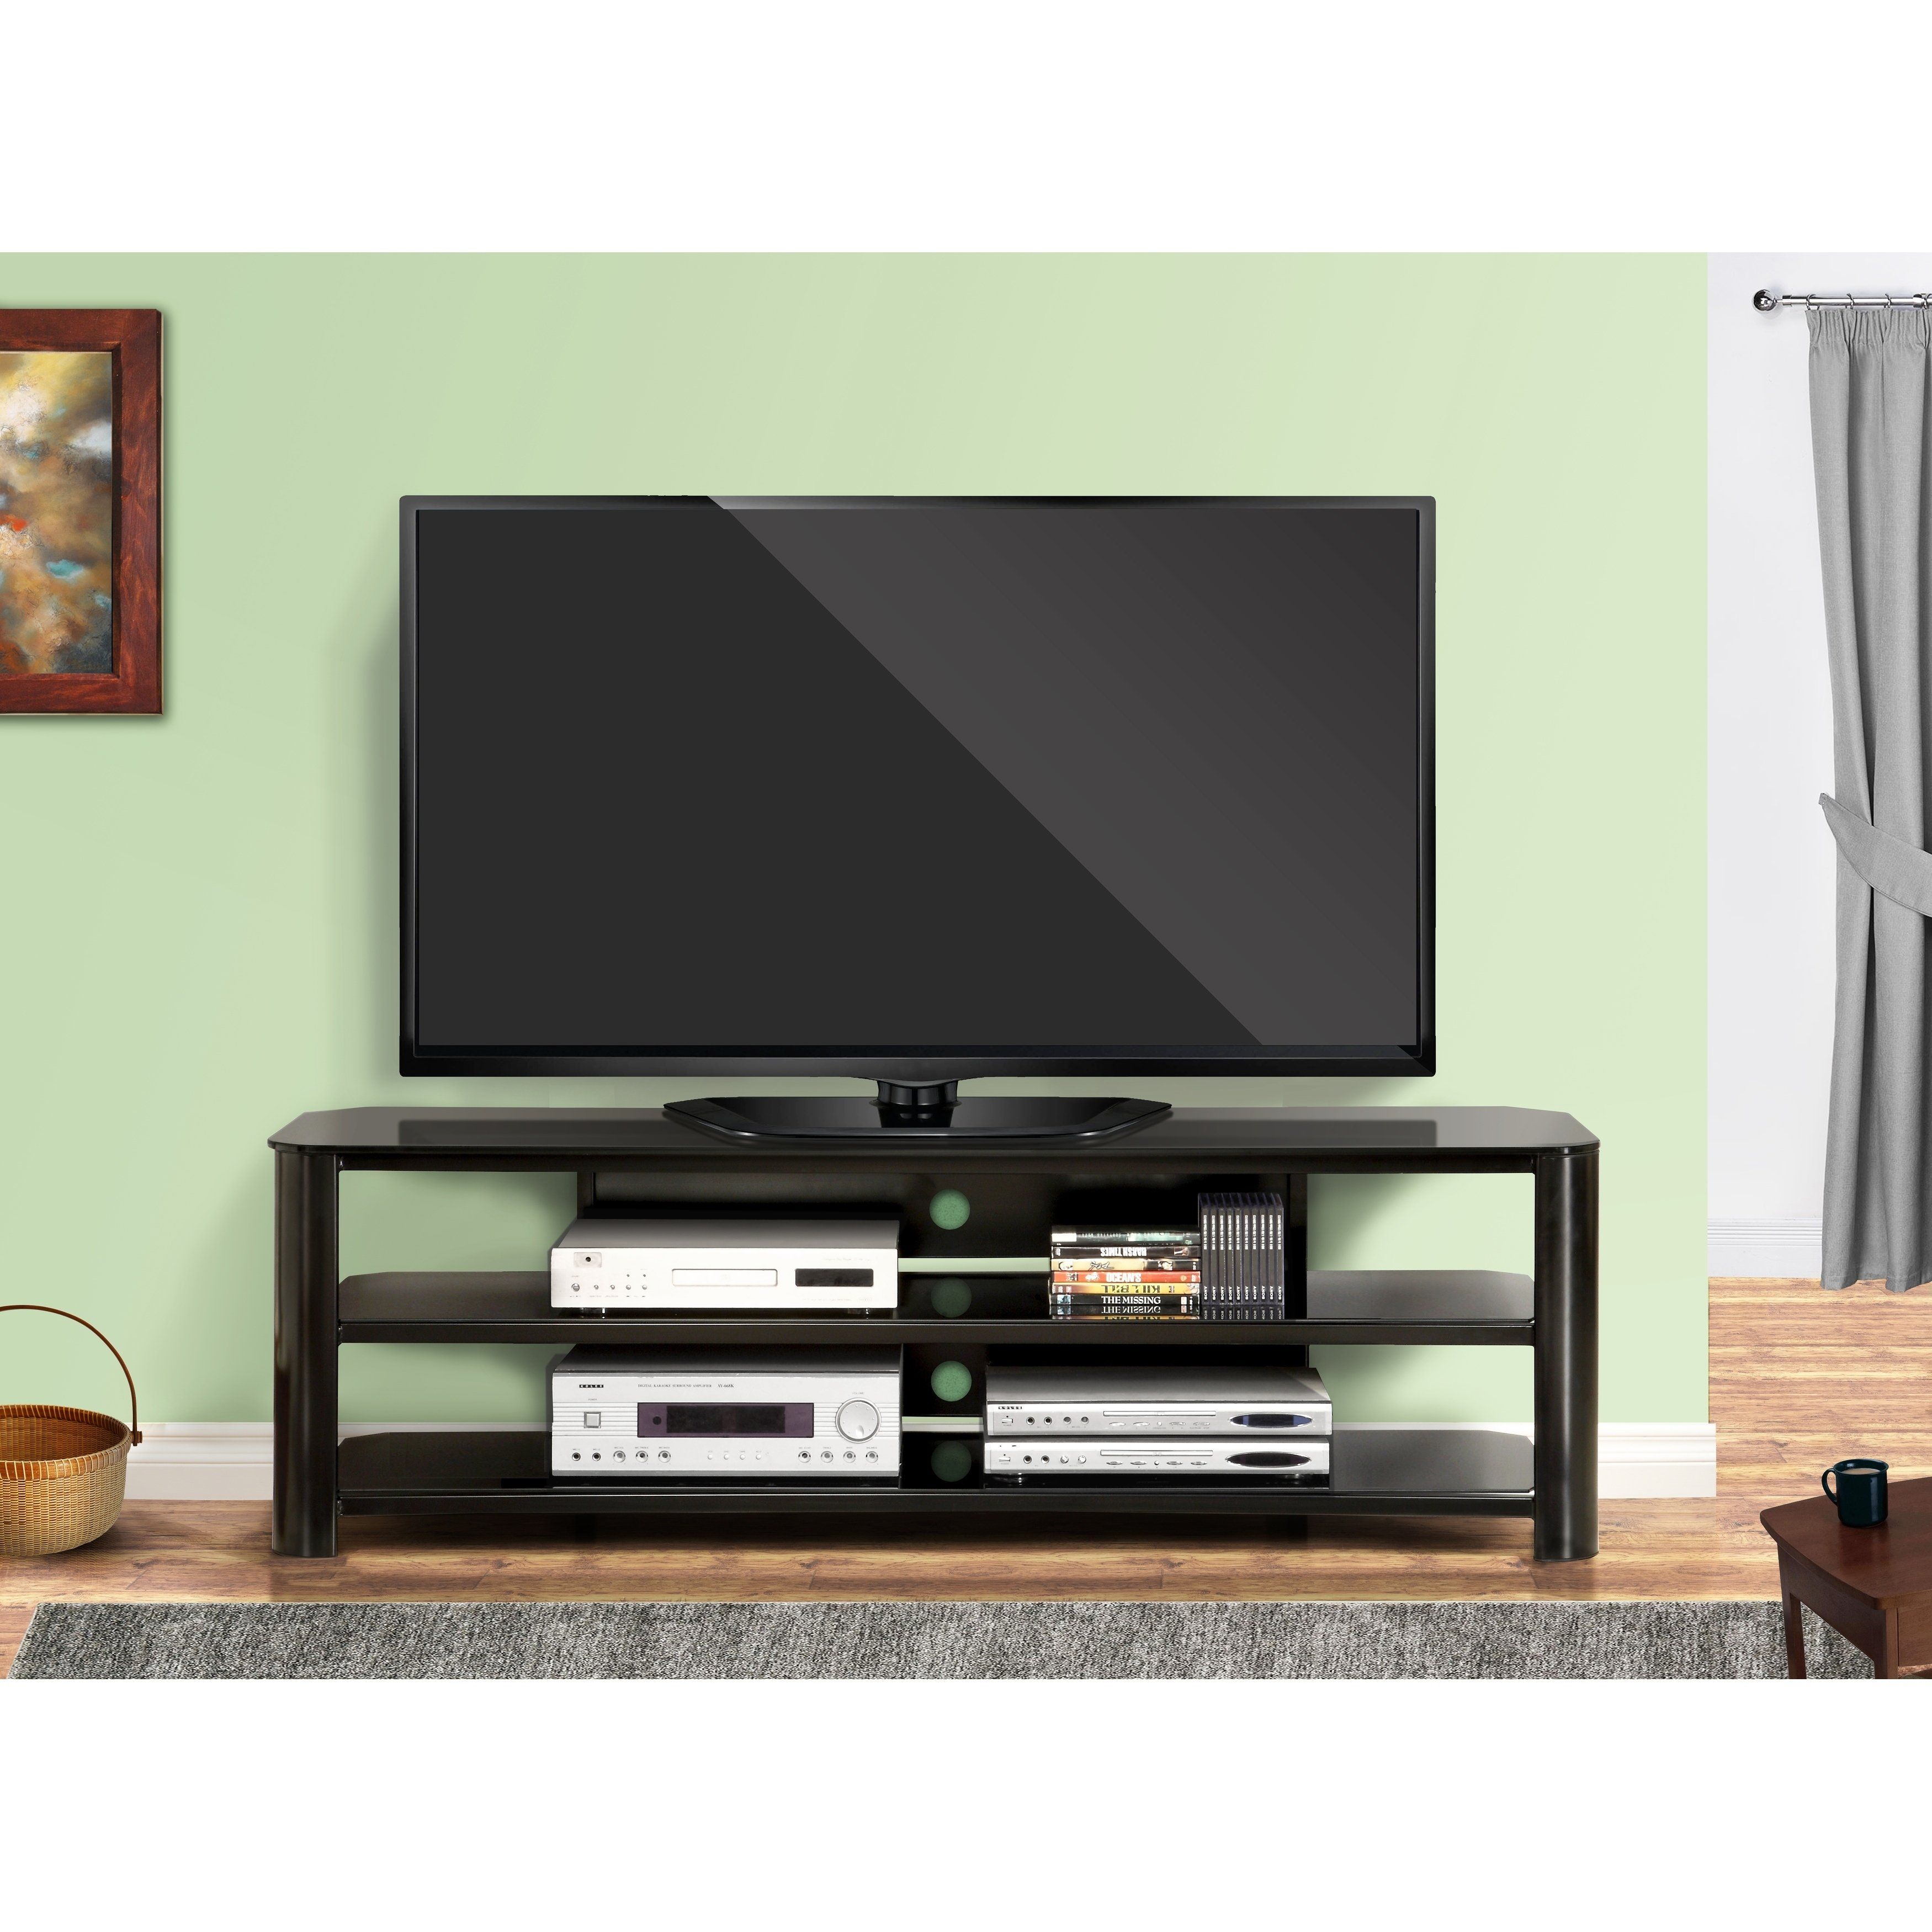 Shop Fold 'n' Snap Oxford Ez Black Innovex Tv Stand – Free Shipping Within Oxford 84 Inch Tv Stands (View 9 of 30)